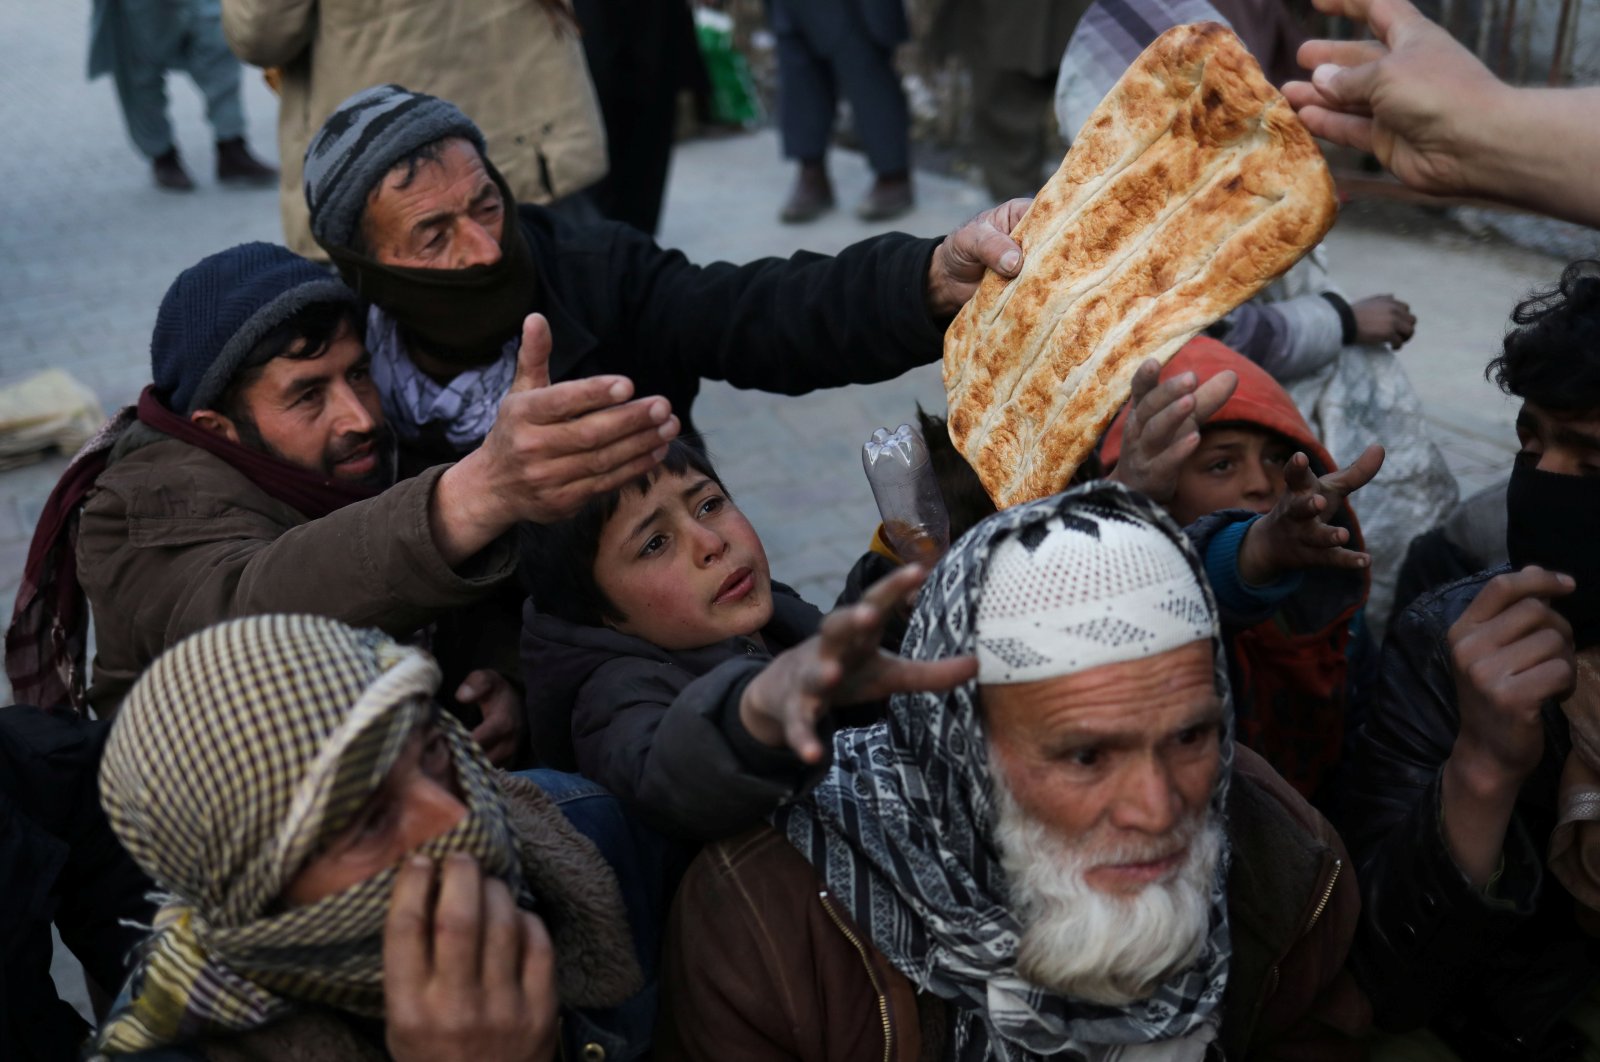 People reach out to receive bread, in Kabul, Afghanistan, Jan. 31, 2022. (Reuters Photo)